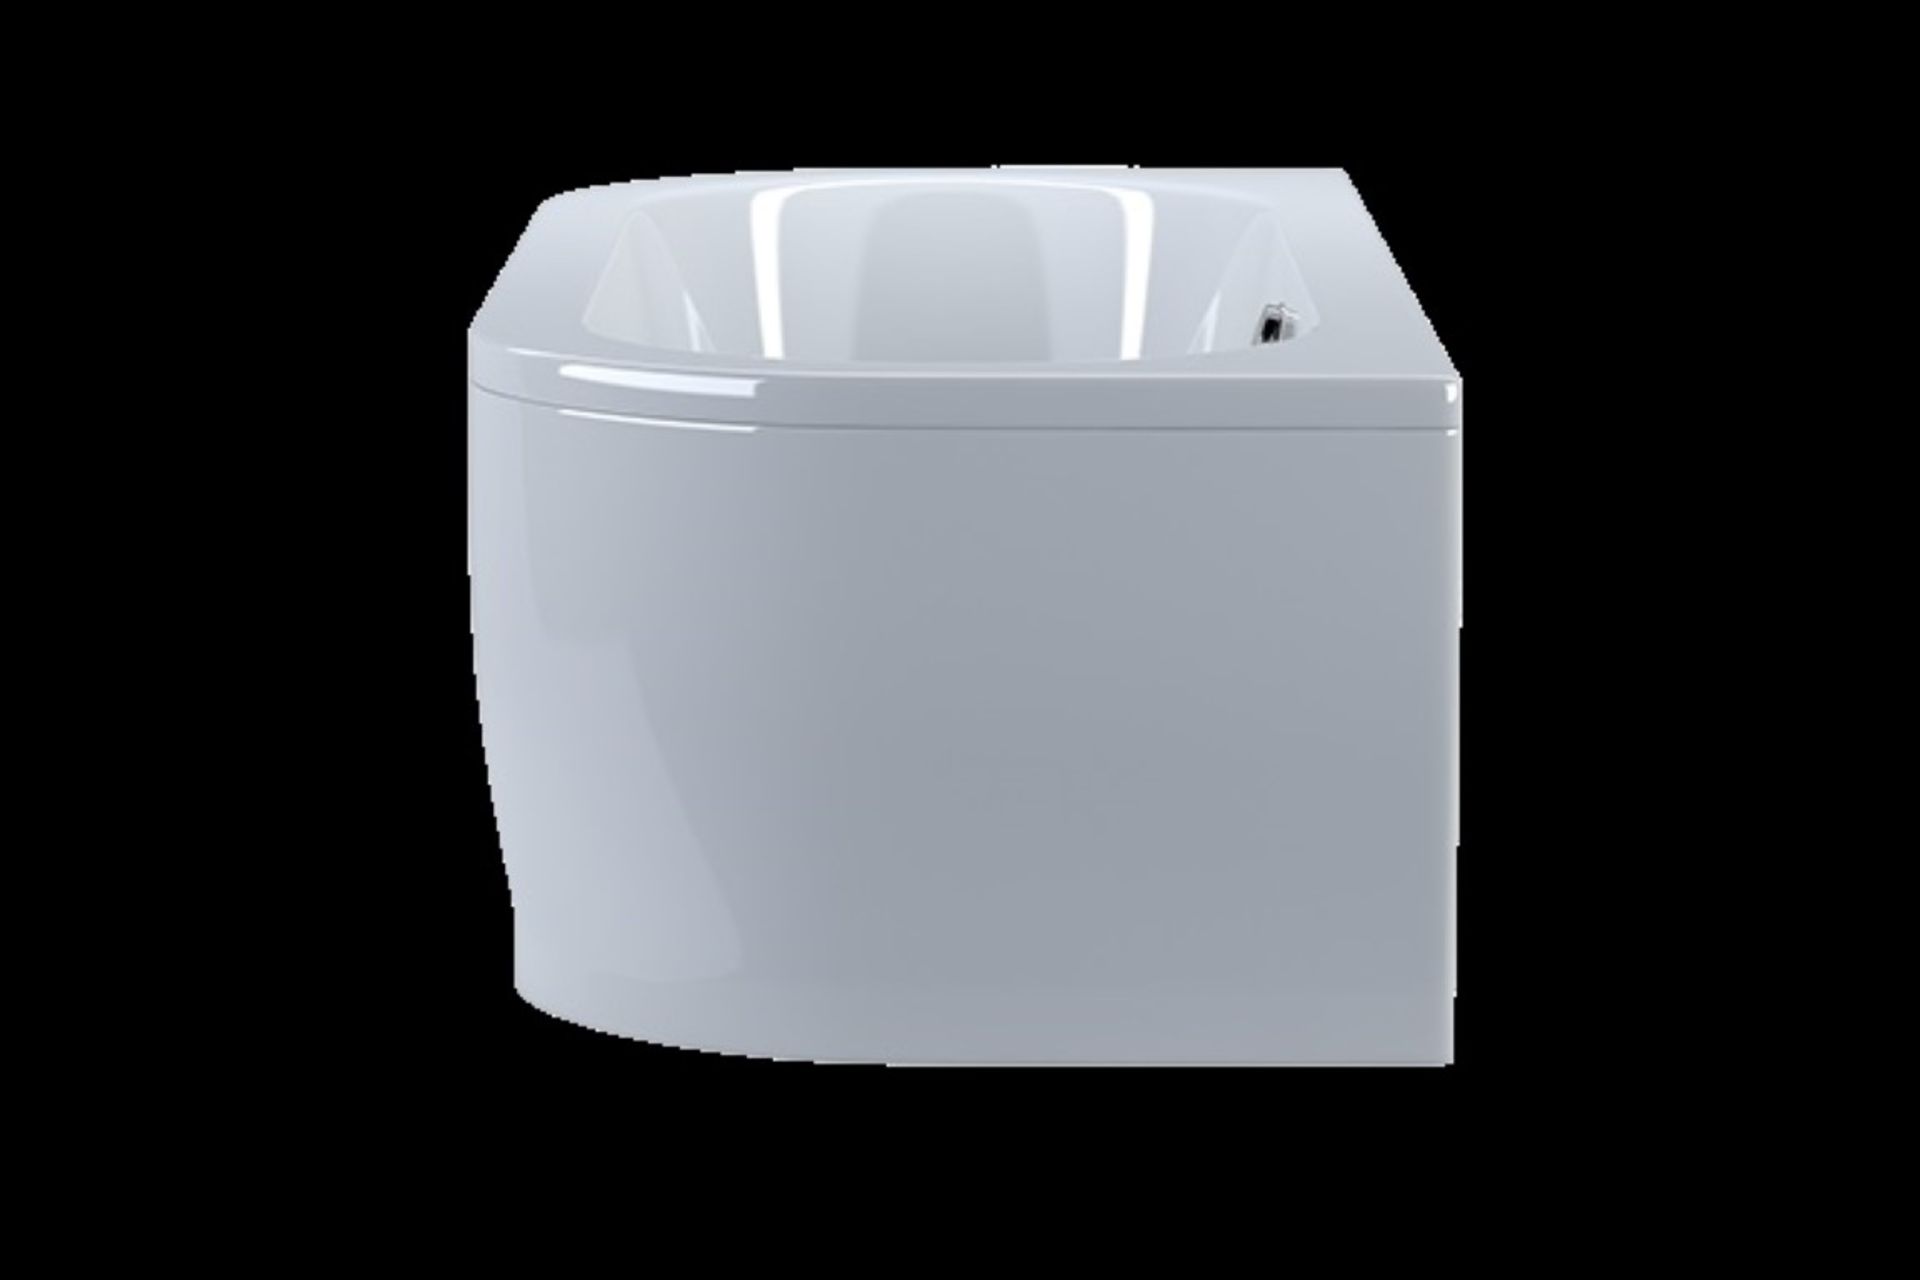 1 x "Palladio" BACK TO WALL BATH - Stylish Curvaceous Design - White Acrylic - 1700 X 750MM - - Image 4 of 5